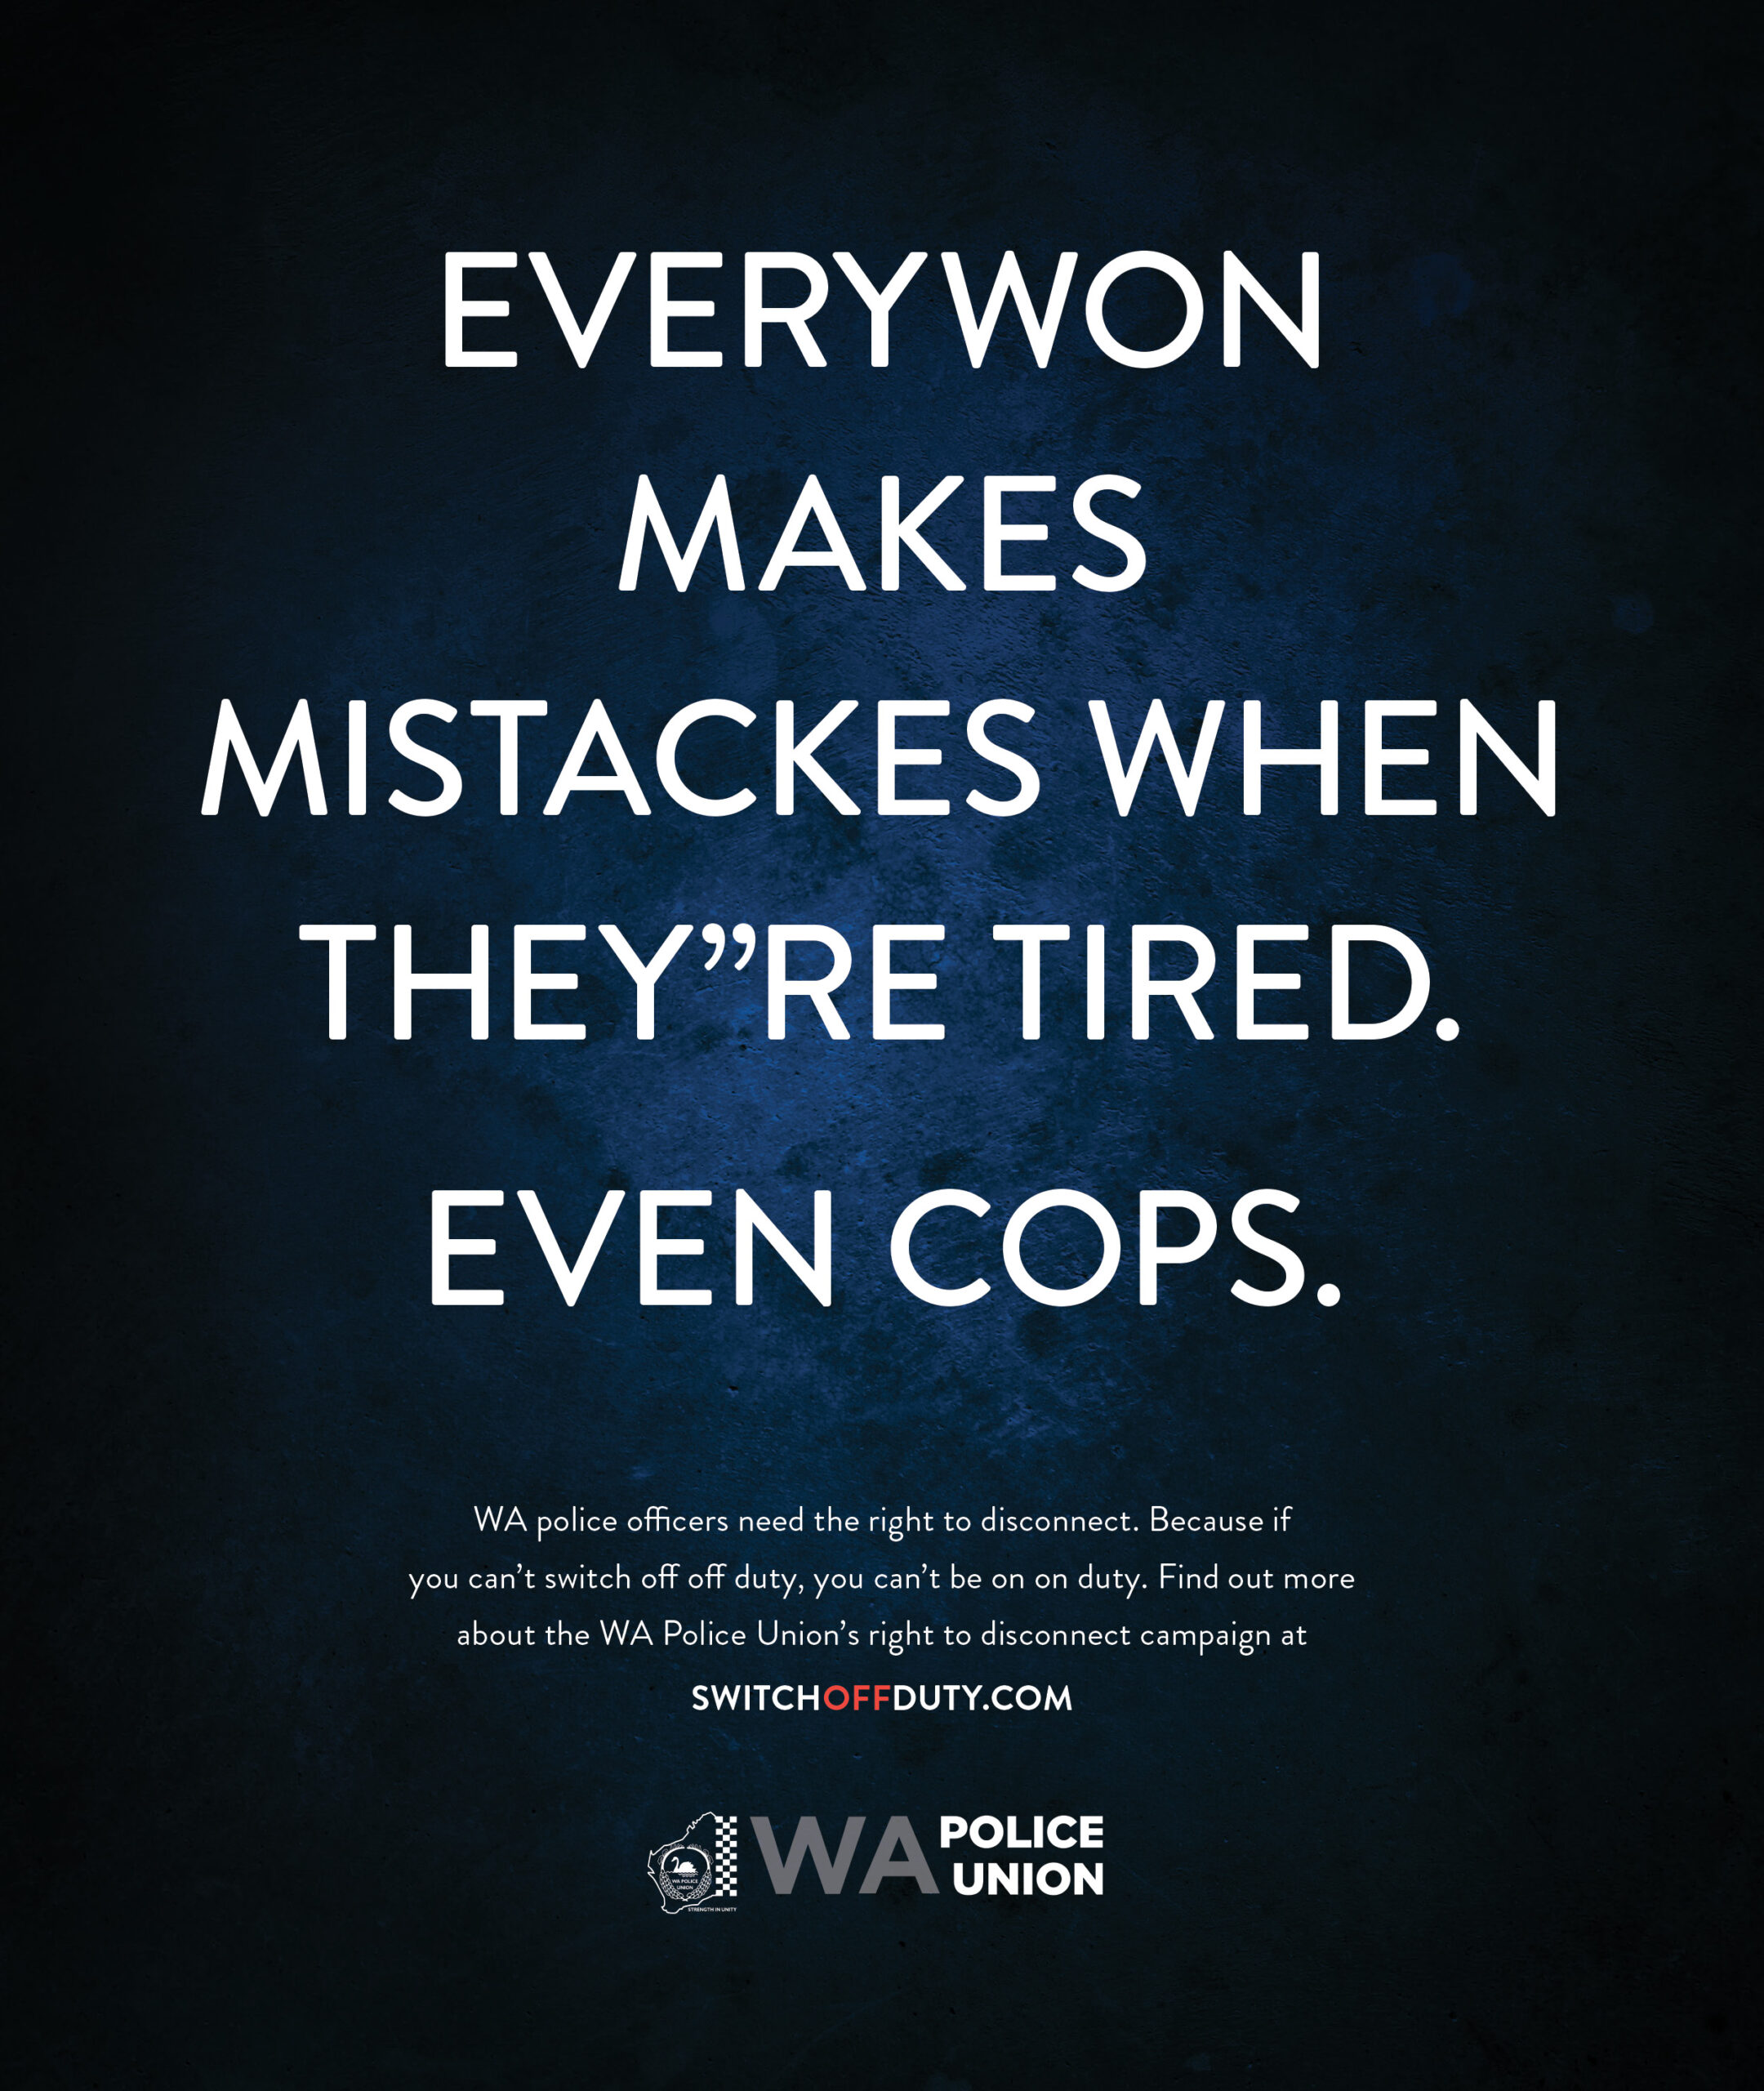 Everywon makes mistackes when they"re tired. Even cops.